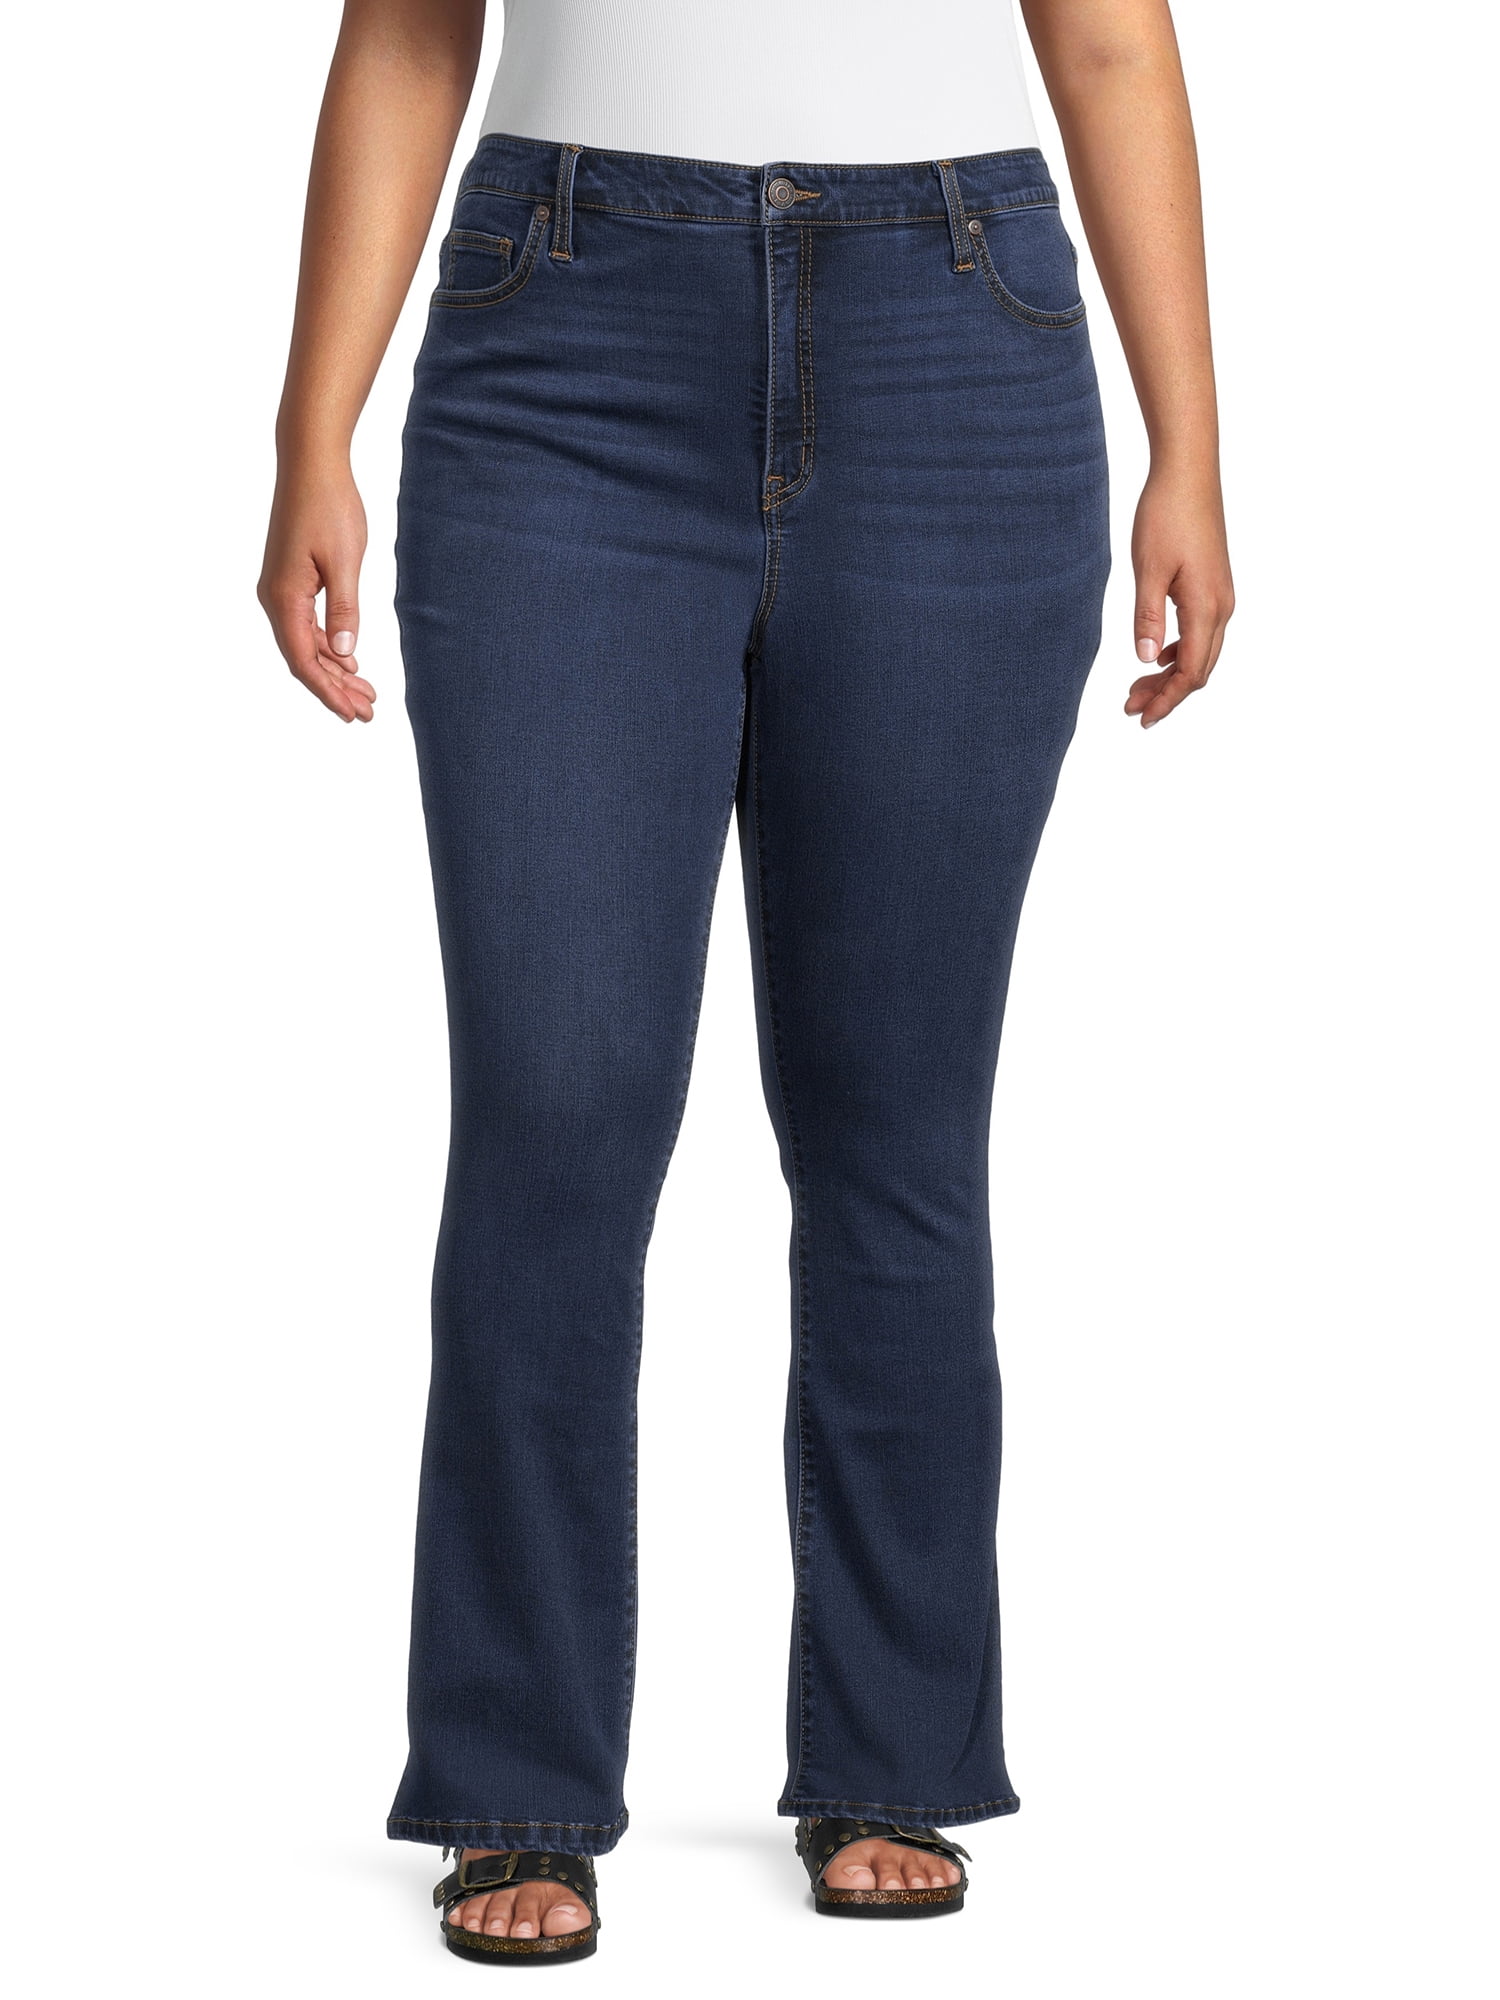 Plus size low rise jeans can be a stylish and flattering choice for individuals seeking a trendy look. These jeans sit below the natural waistline